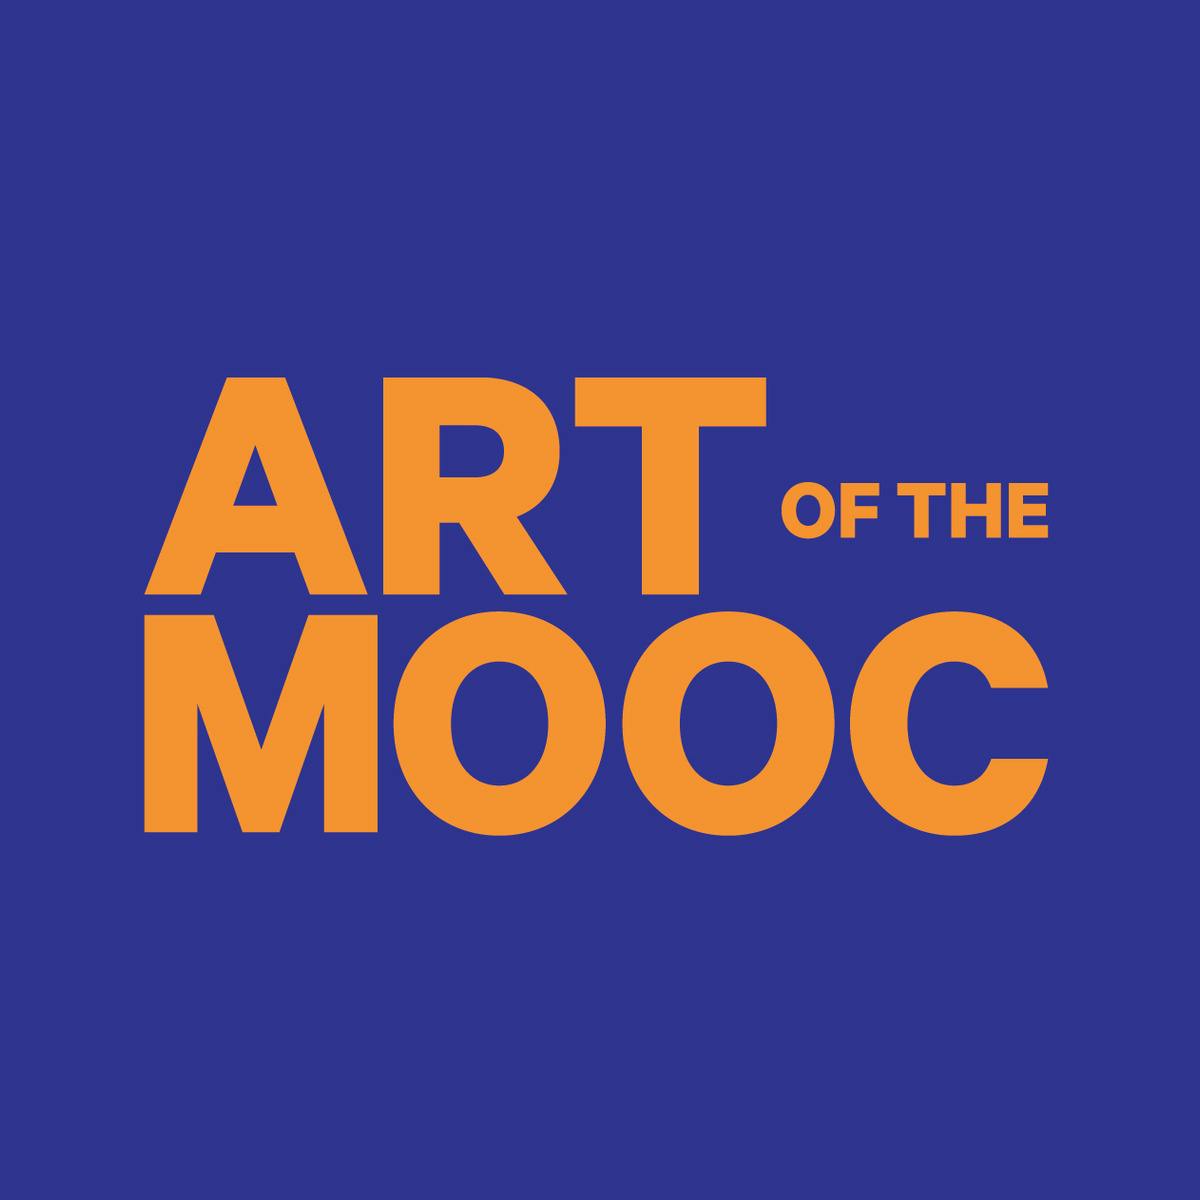 Art Of The Mooc Experiments With Sound Coursera